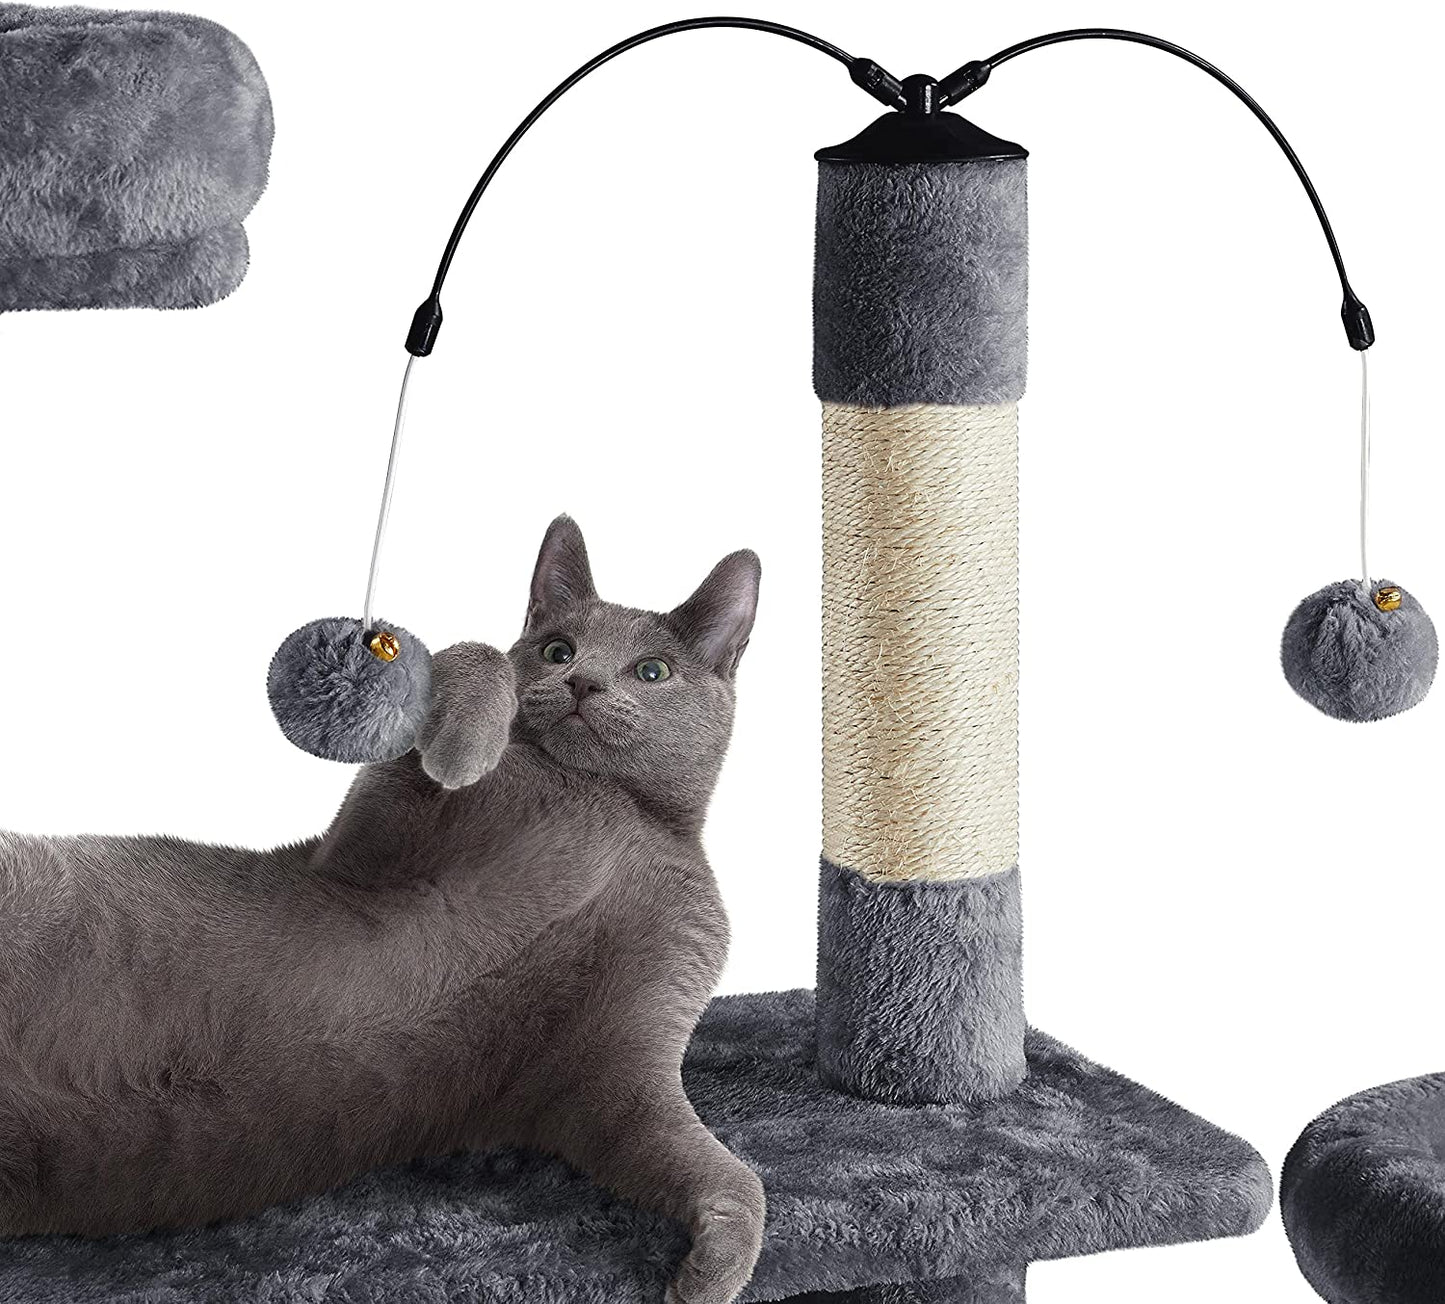 Multi-Level Cat Tree Cat Tower for Indoor Cats, Cat Condo with Scratching Posts, Cat Furniture Play Center, Plush Perch, Rotatable Cat Tree for Kittens/Large Cat, Dark Gray